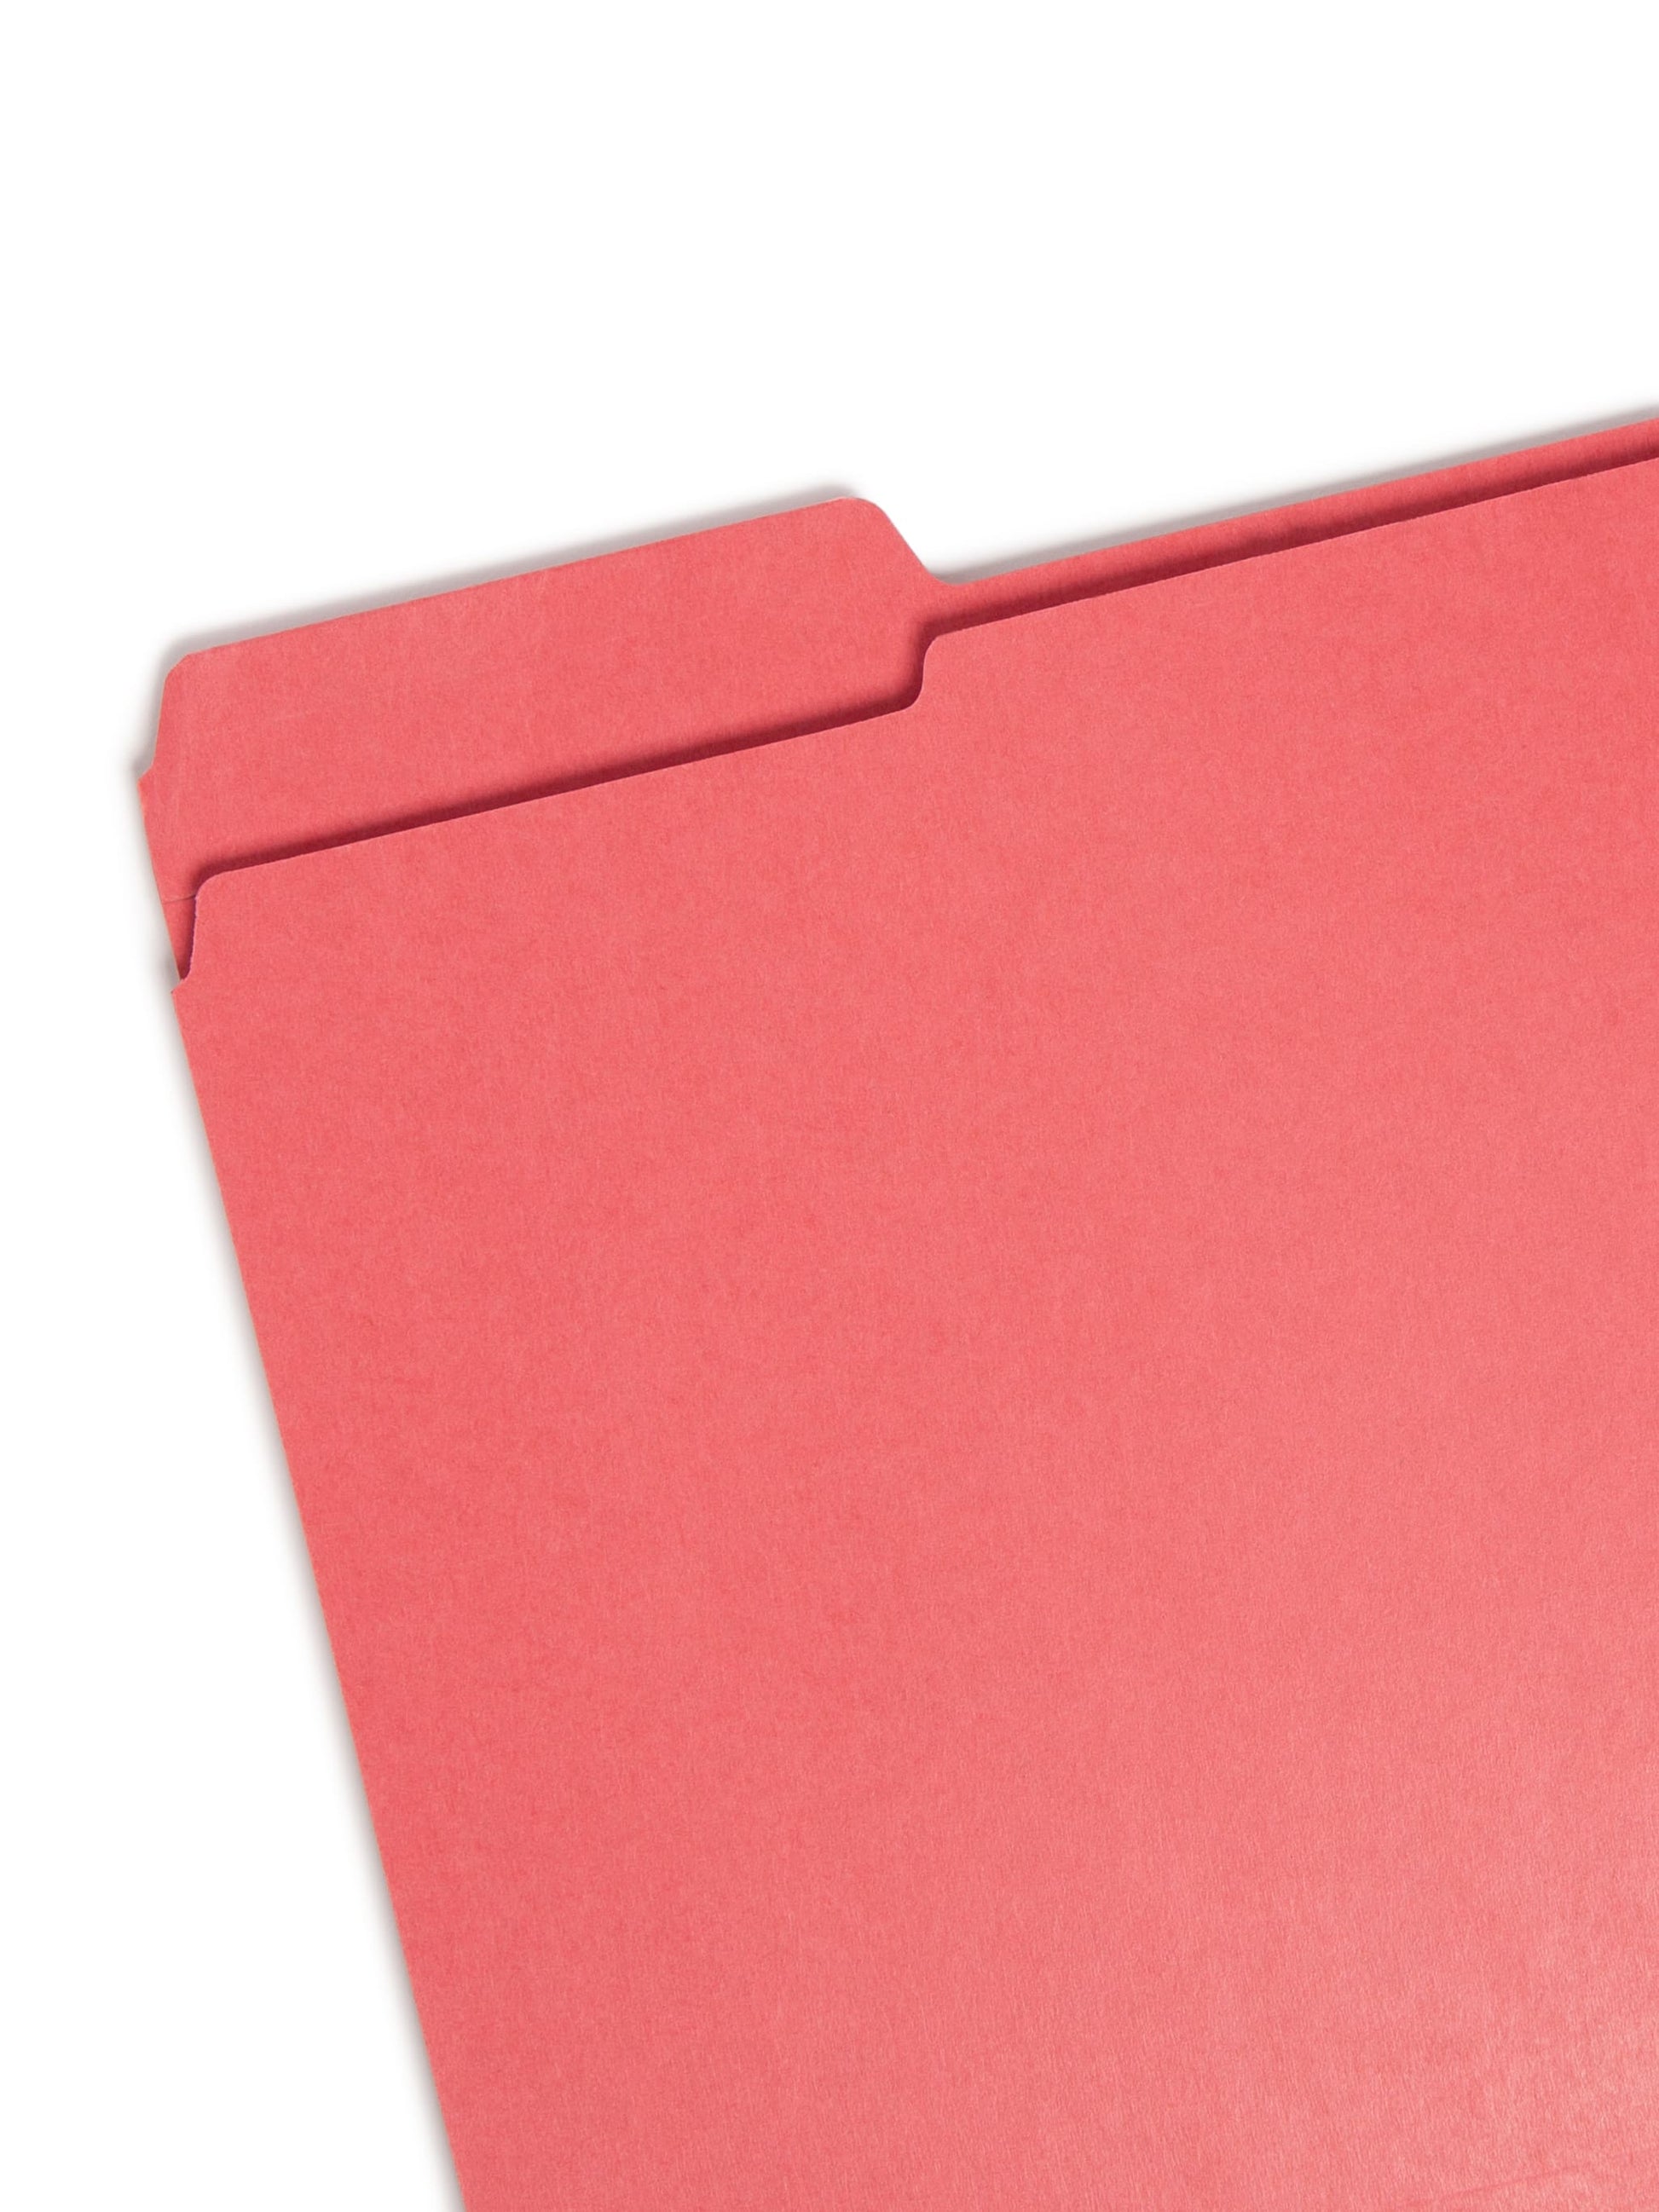 100% Recycled File Folders, Assorted Colors Color, Letter Size, Set of 100, 086486120081